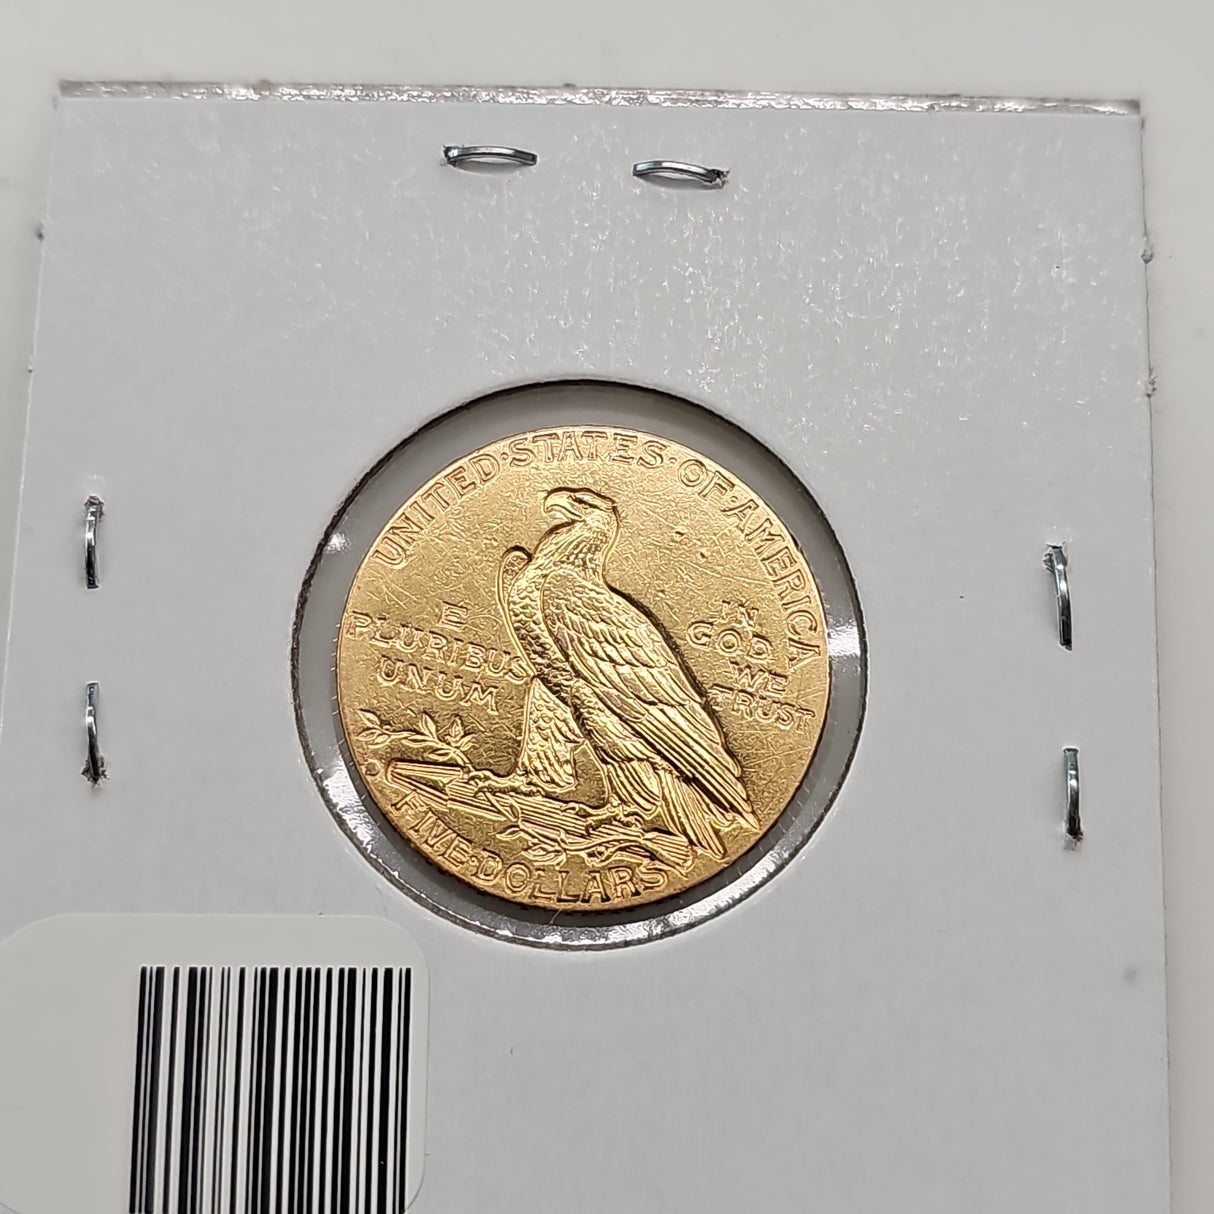 1914 $5 Indian Head Gold Coin